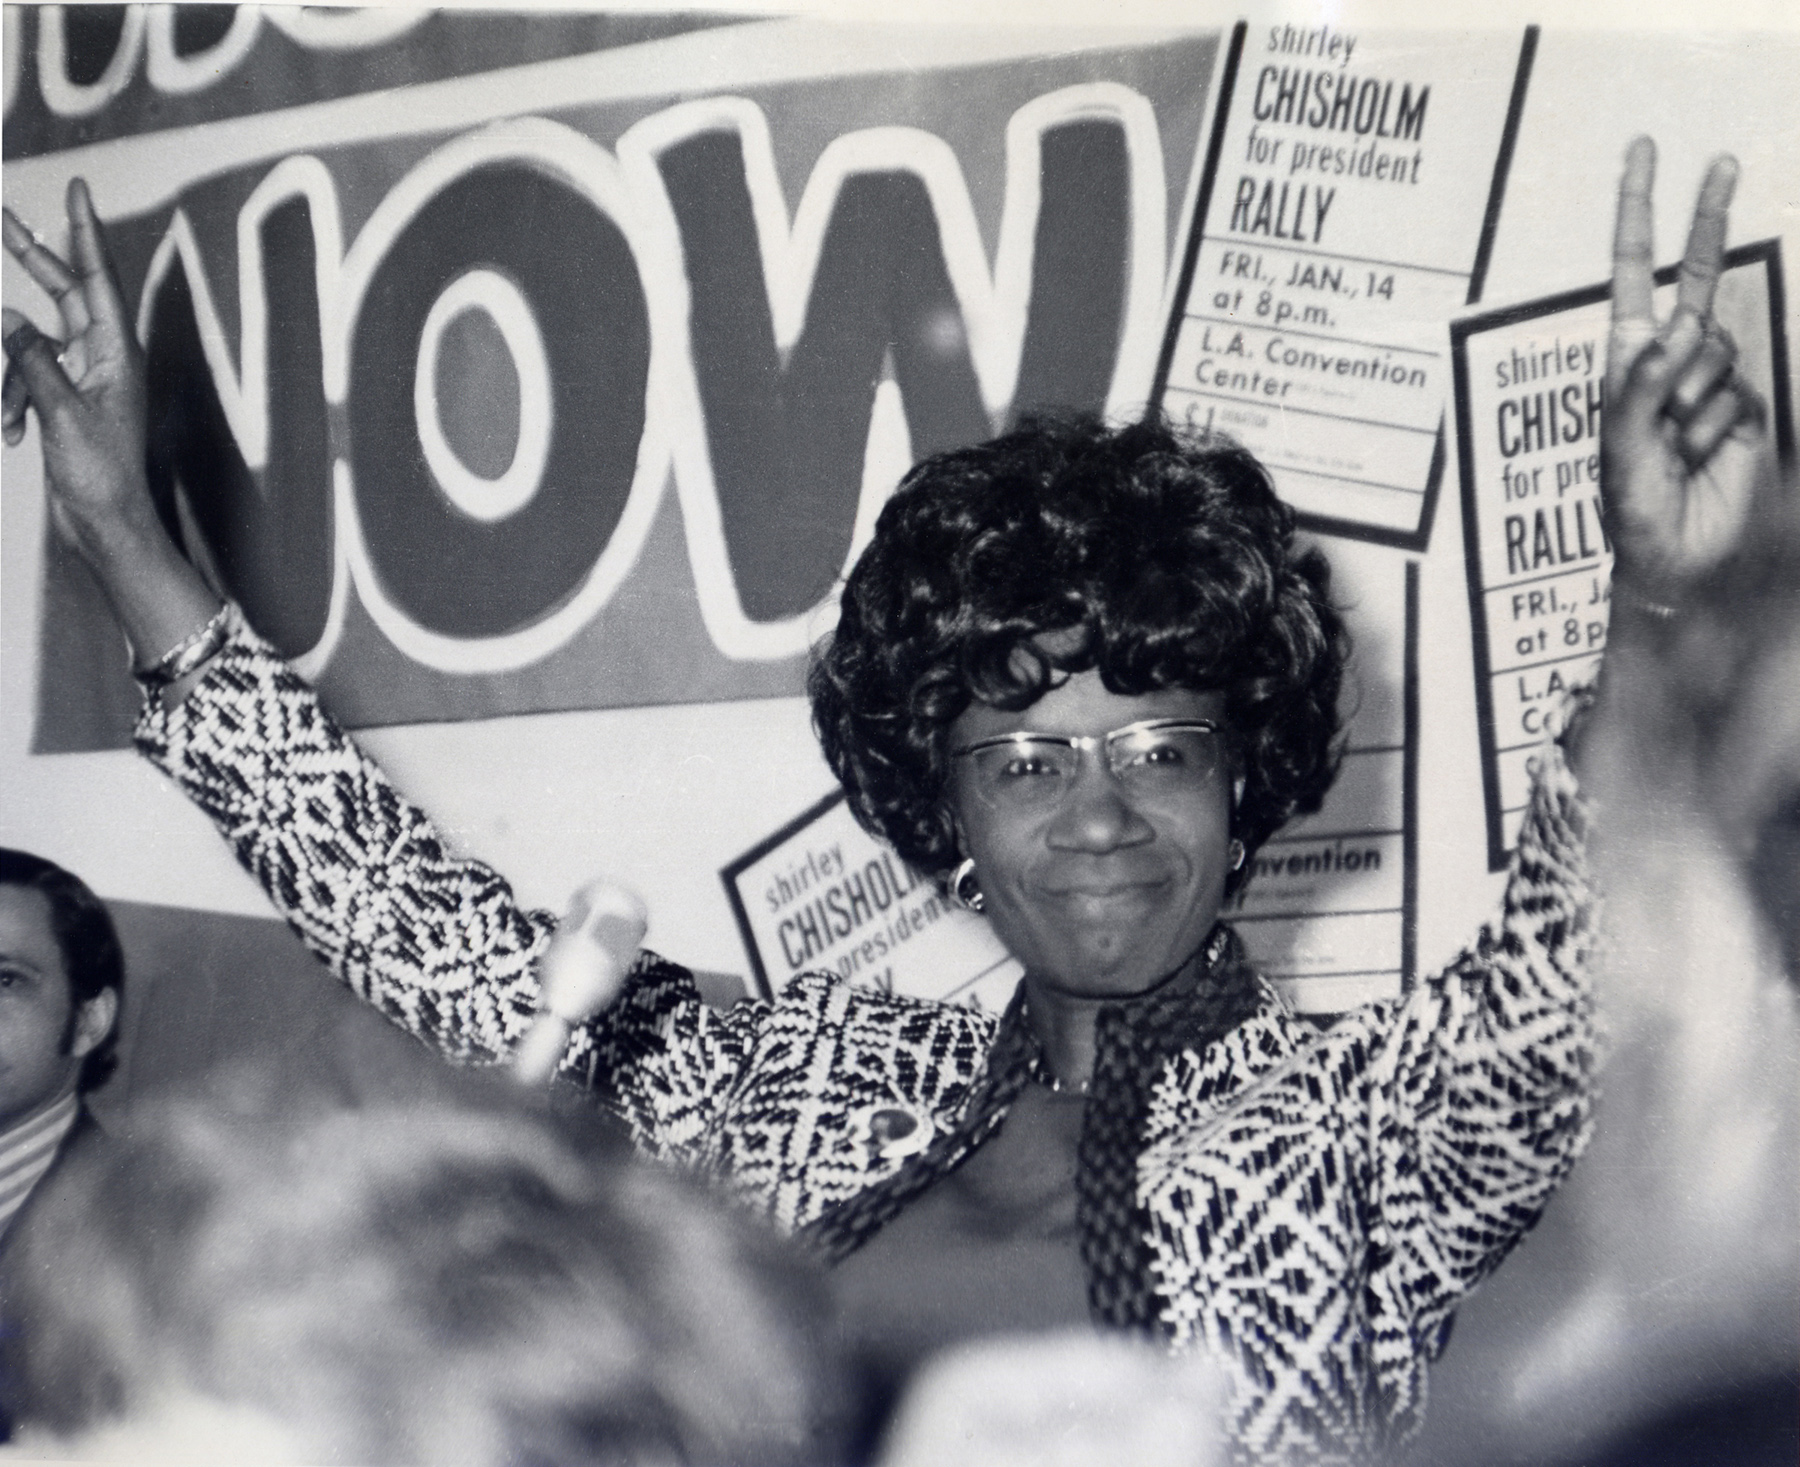 Image 14 Beyond Suffrage The Legacy of Shirley Chisholm 1.24.2018